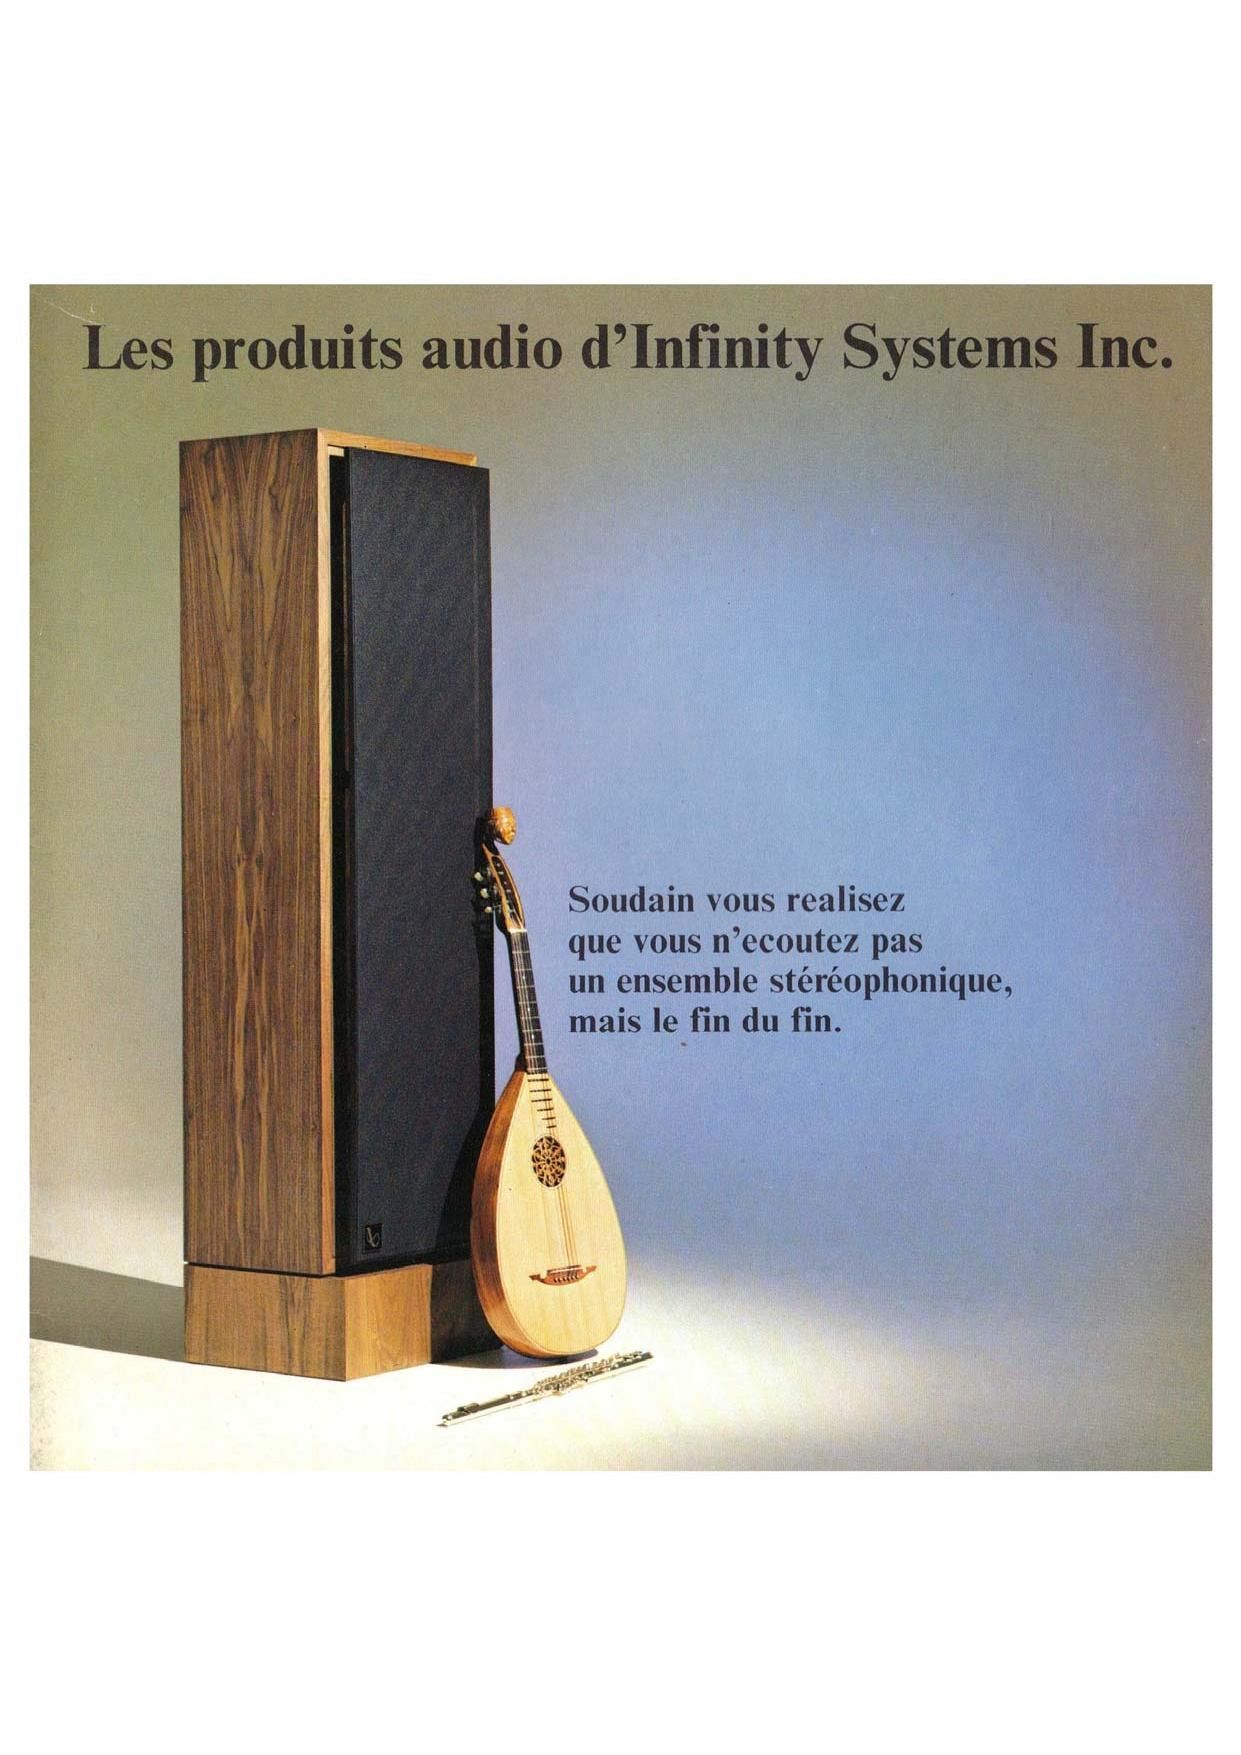 Infinity Audio Products 1977 French Catalog